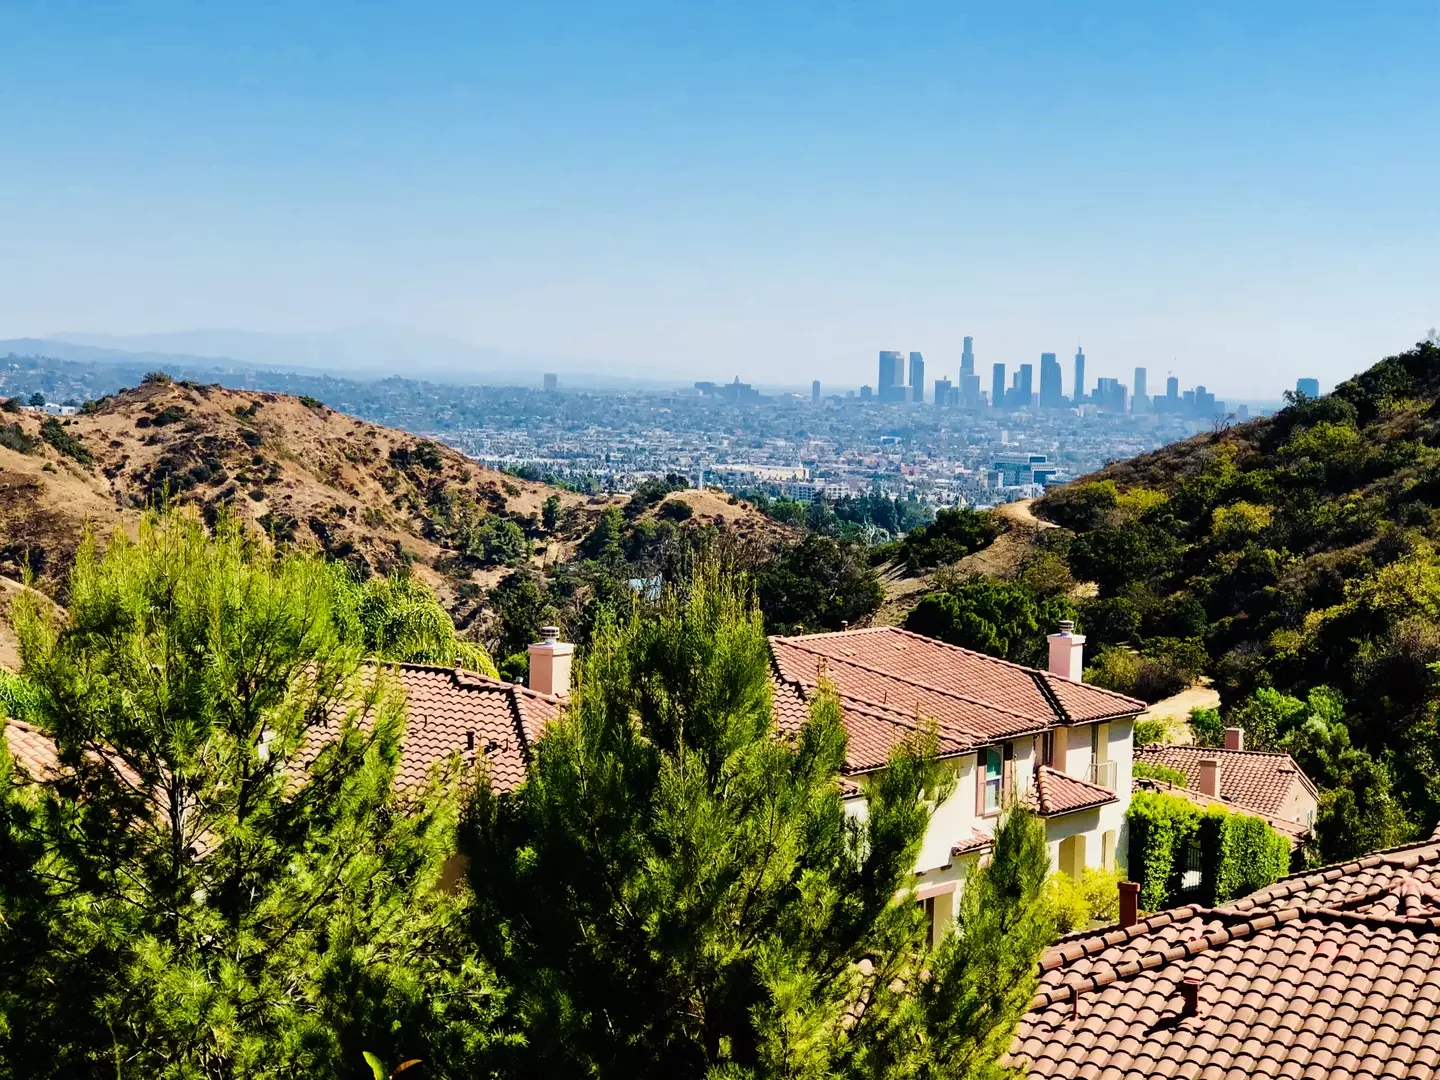 The ordeal took place at a property in the Hollywood Hills.